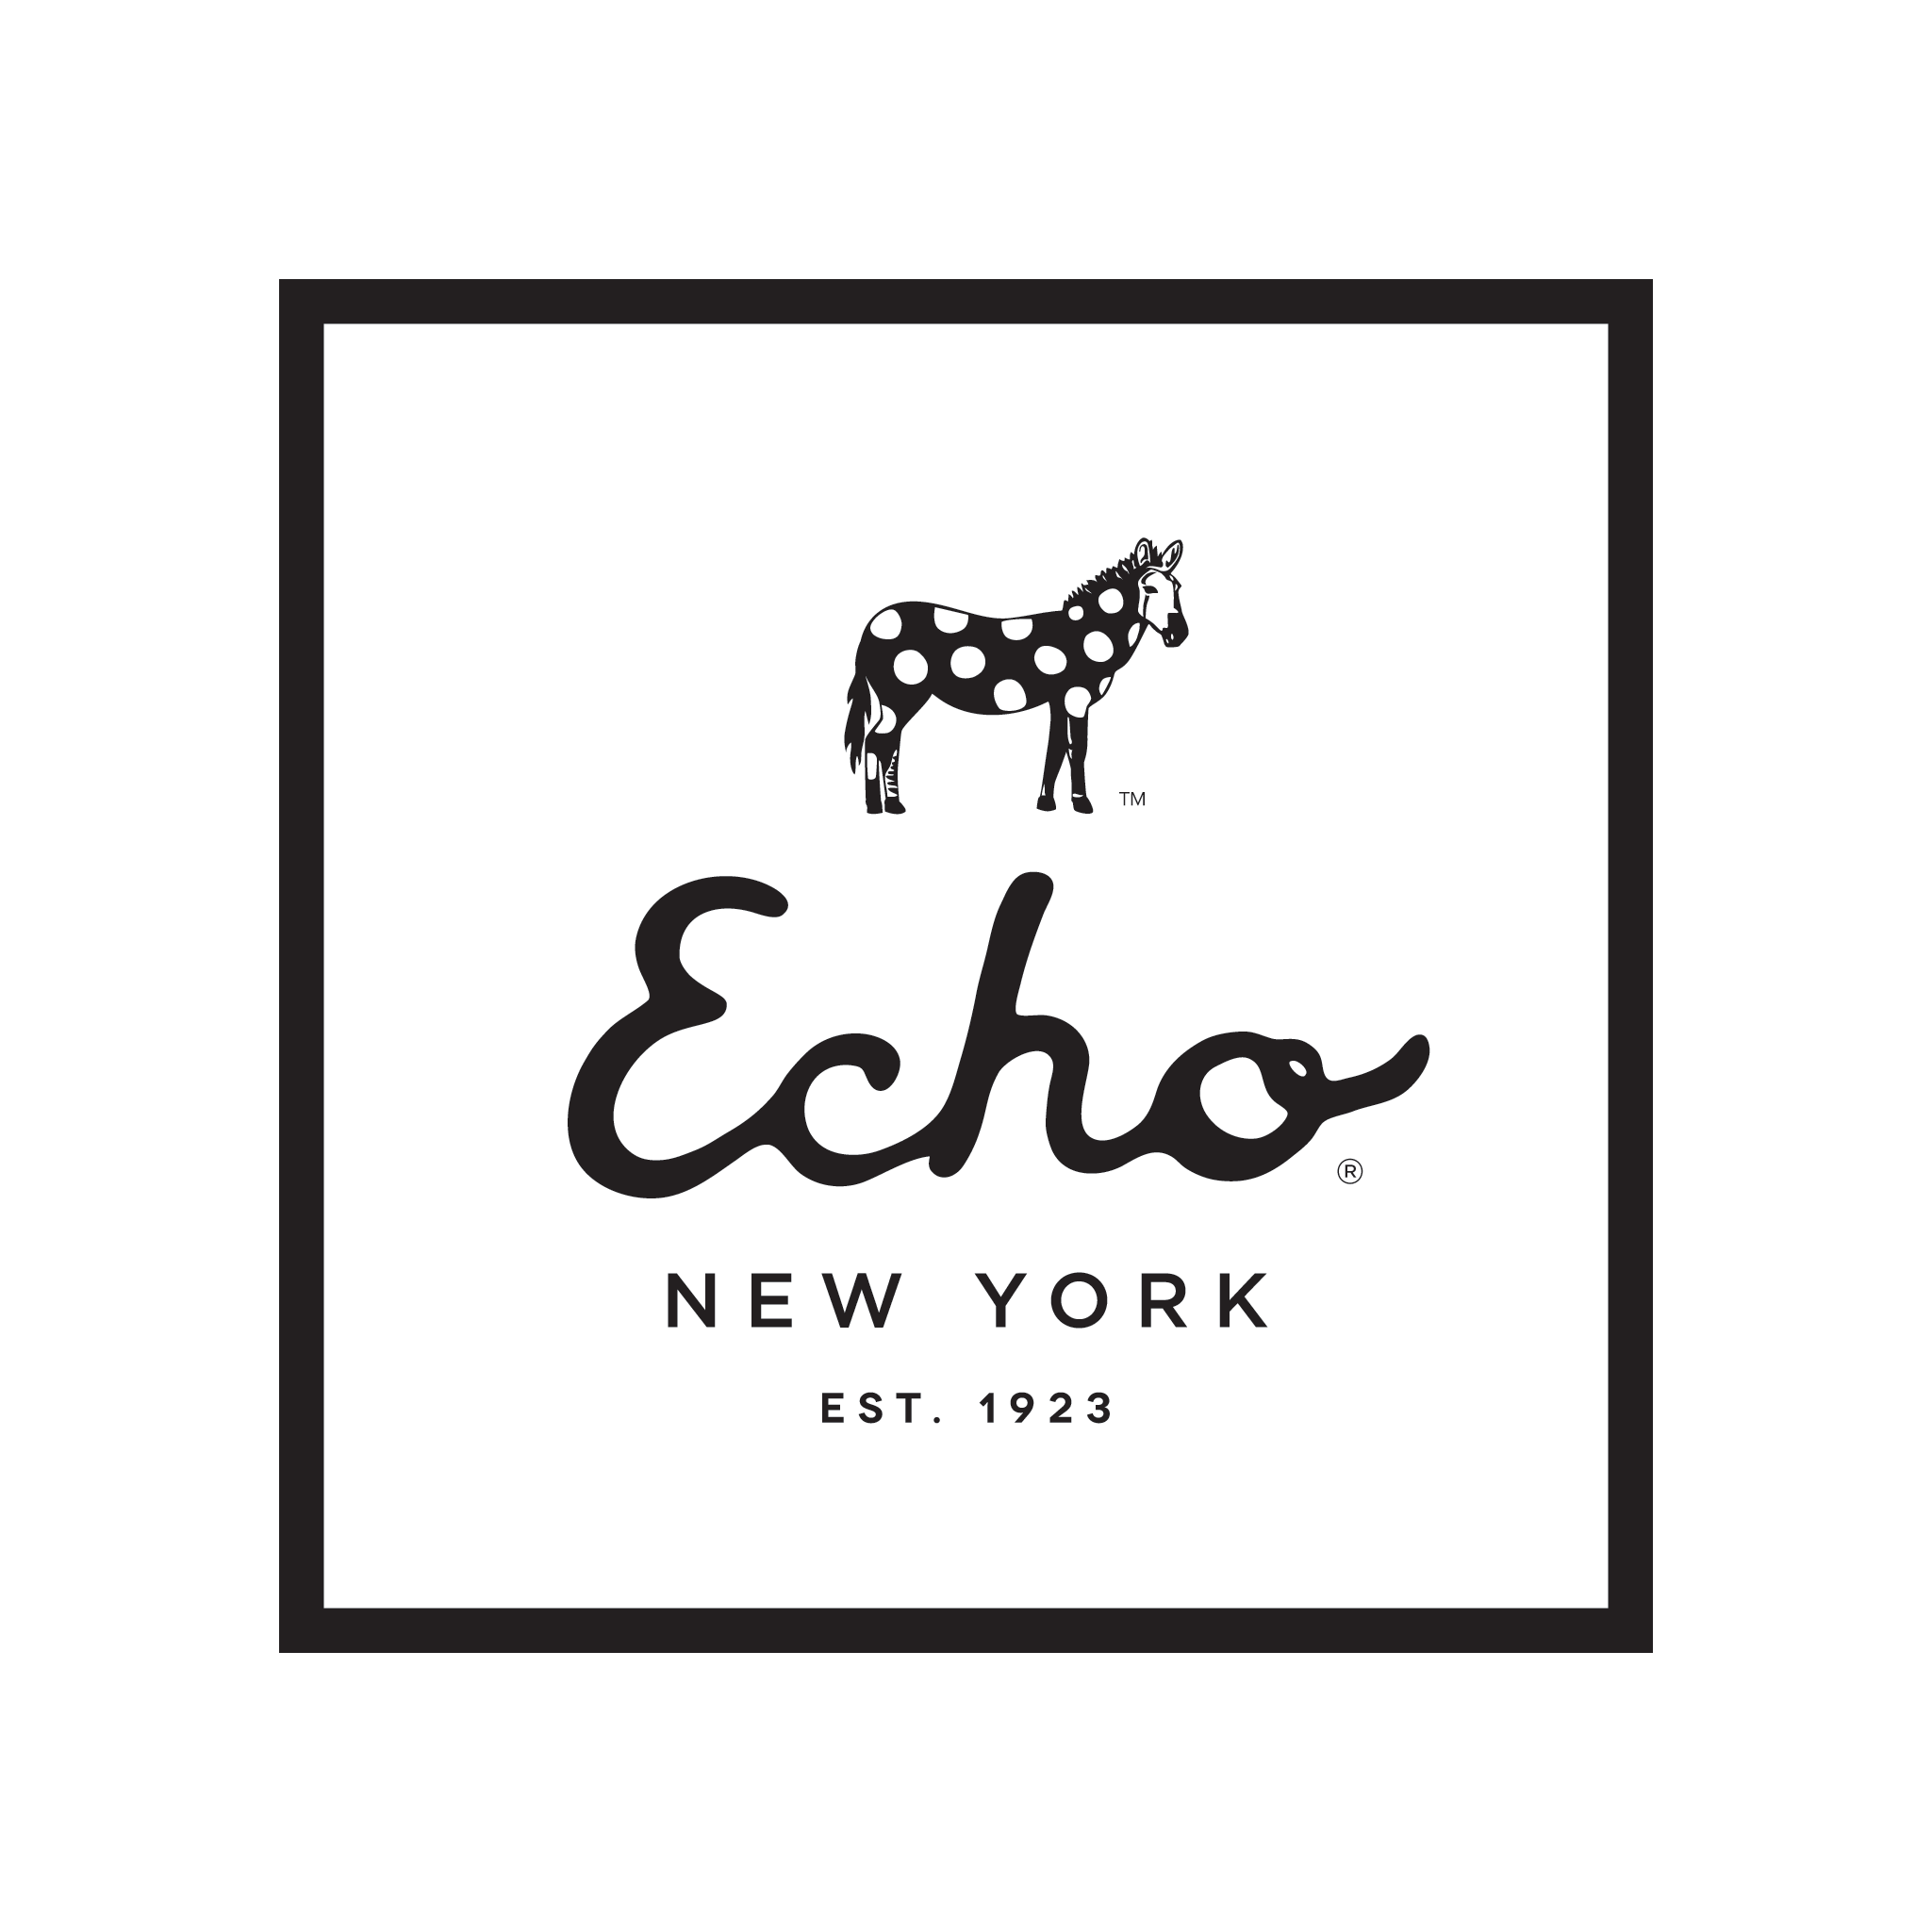 Designer Scarfs, Gloves, Hats, Home Decor, and More | Echo New York